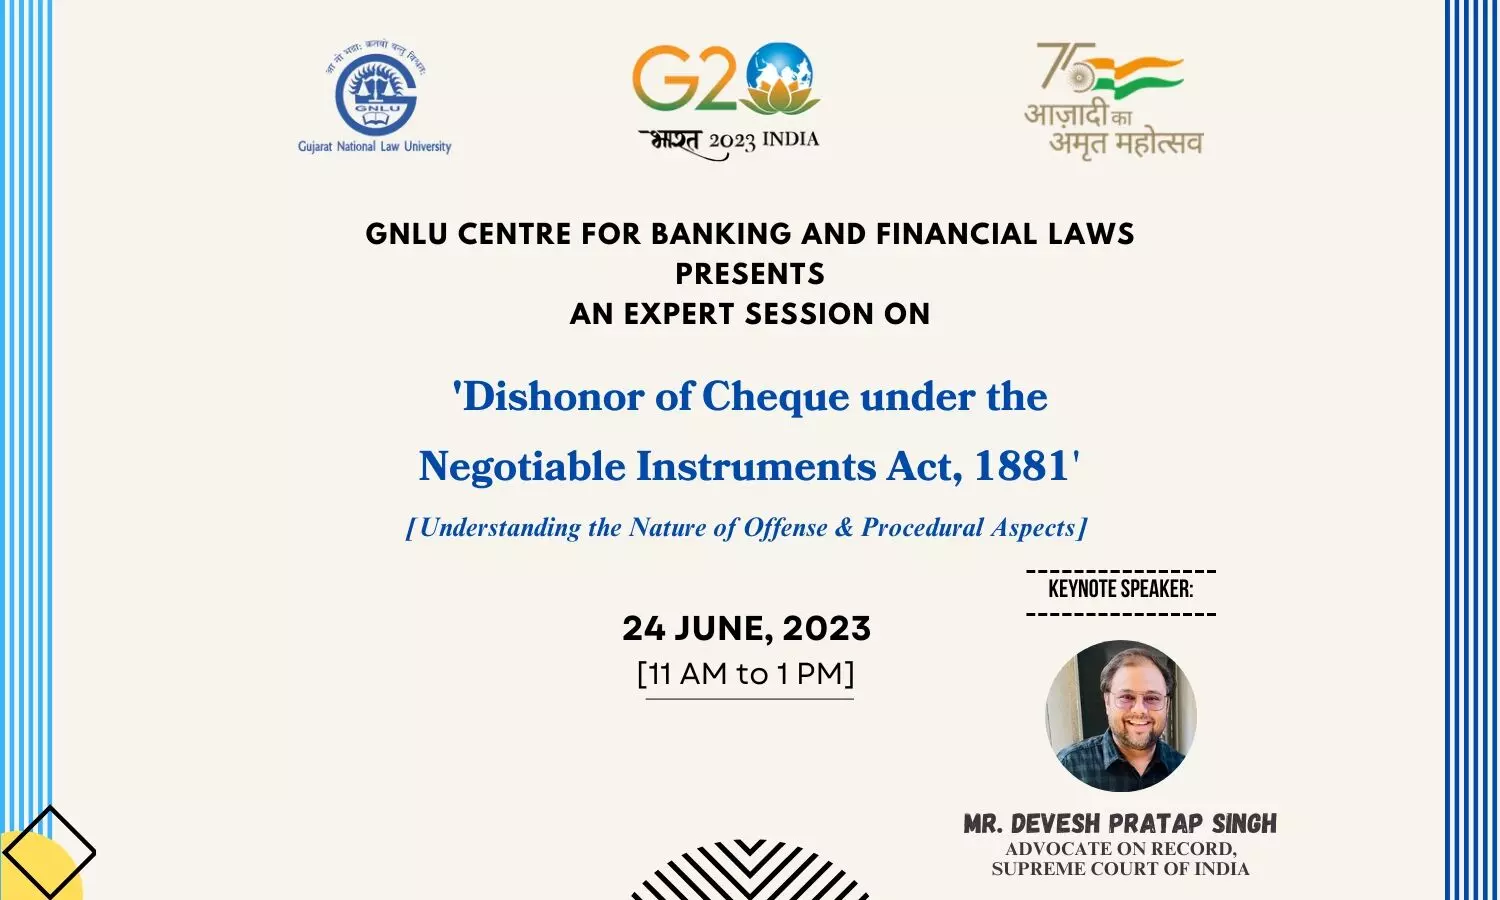 GCFBL Expert Session: Dishonour of Cheque under the Negotiable Instruments Act 1881